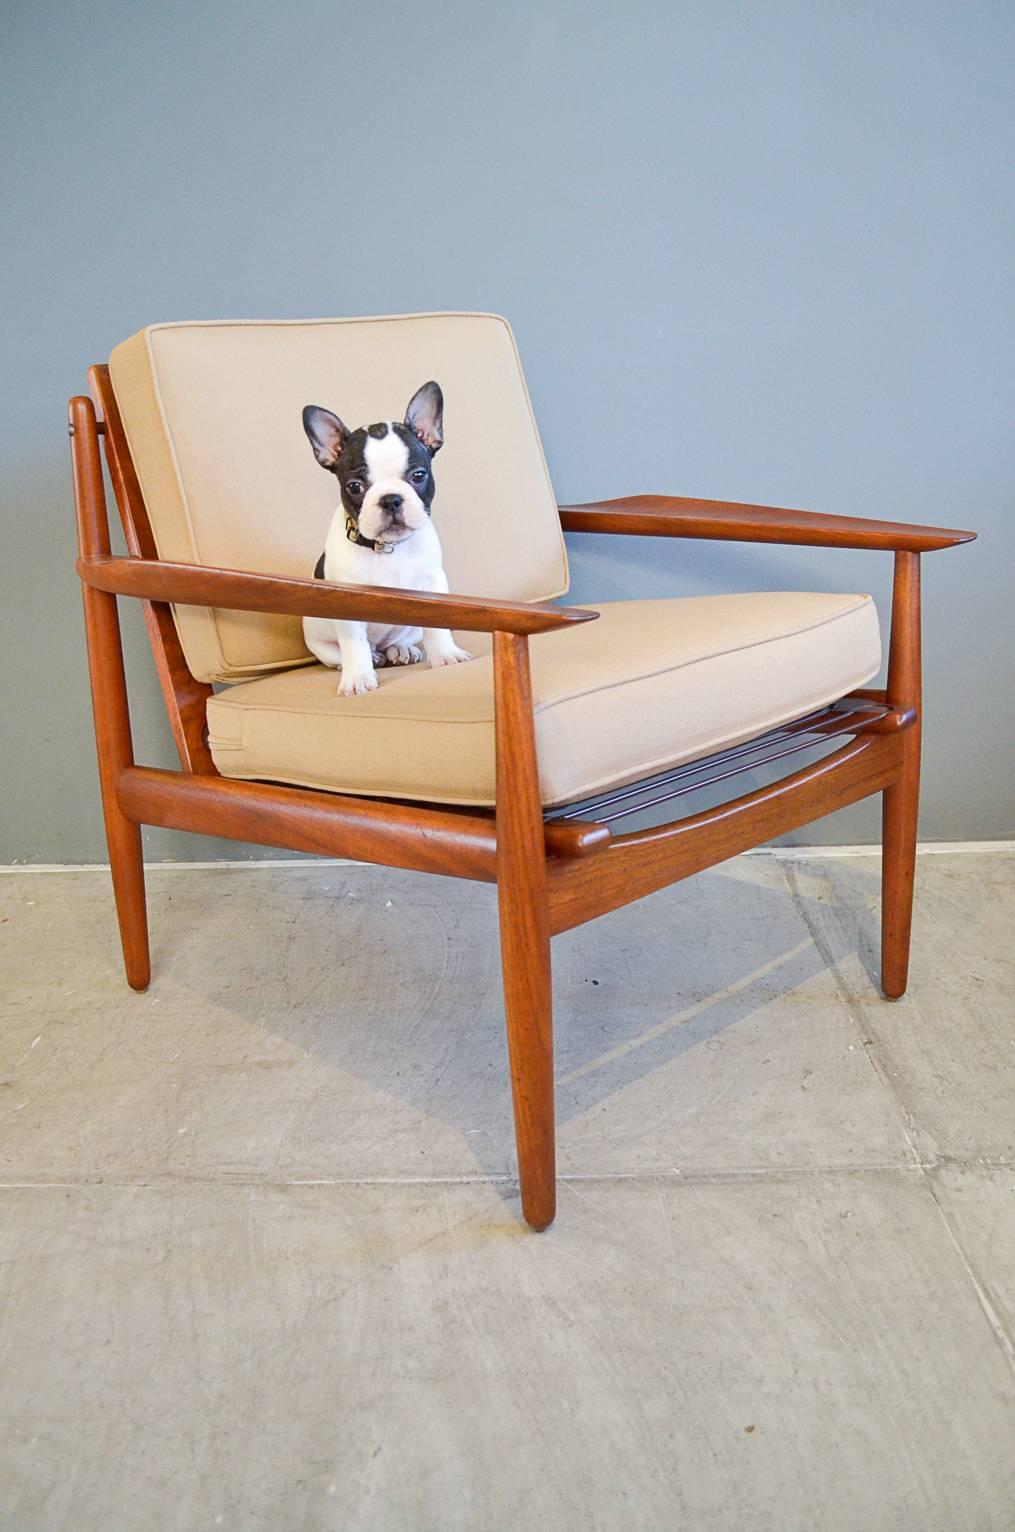 Teak lounge chair with new tan cotton upholstery by Arne Vodder for Glostrup Mobelfabrik, circa 1955.

Wood has been professionally restored and cushions have new foam and tan cotton tweed upholstery. 

Measures: 29